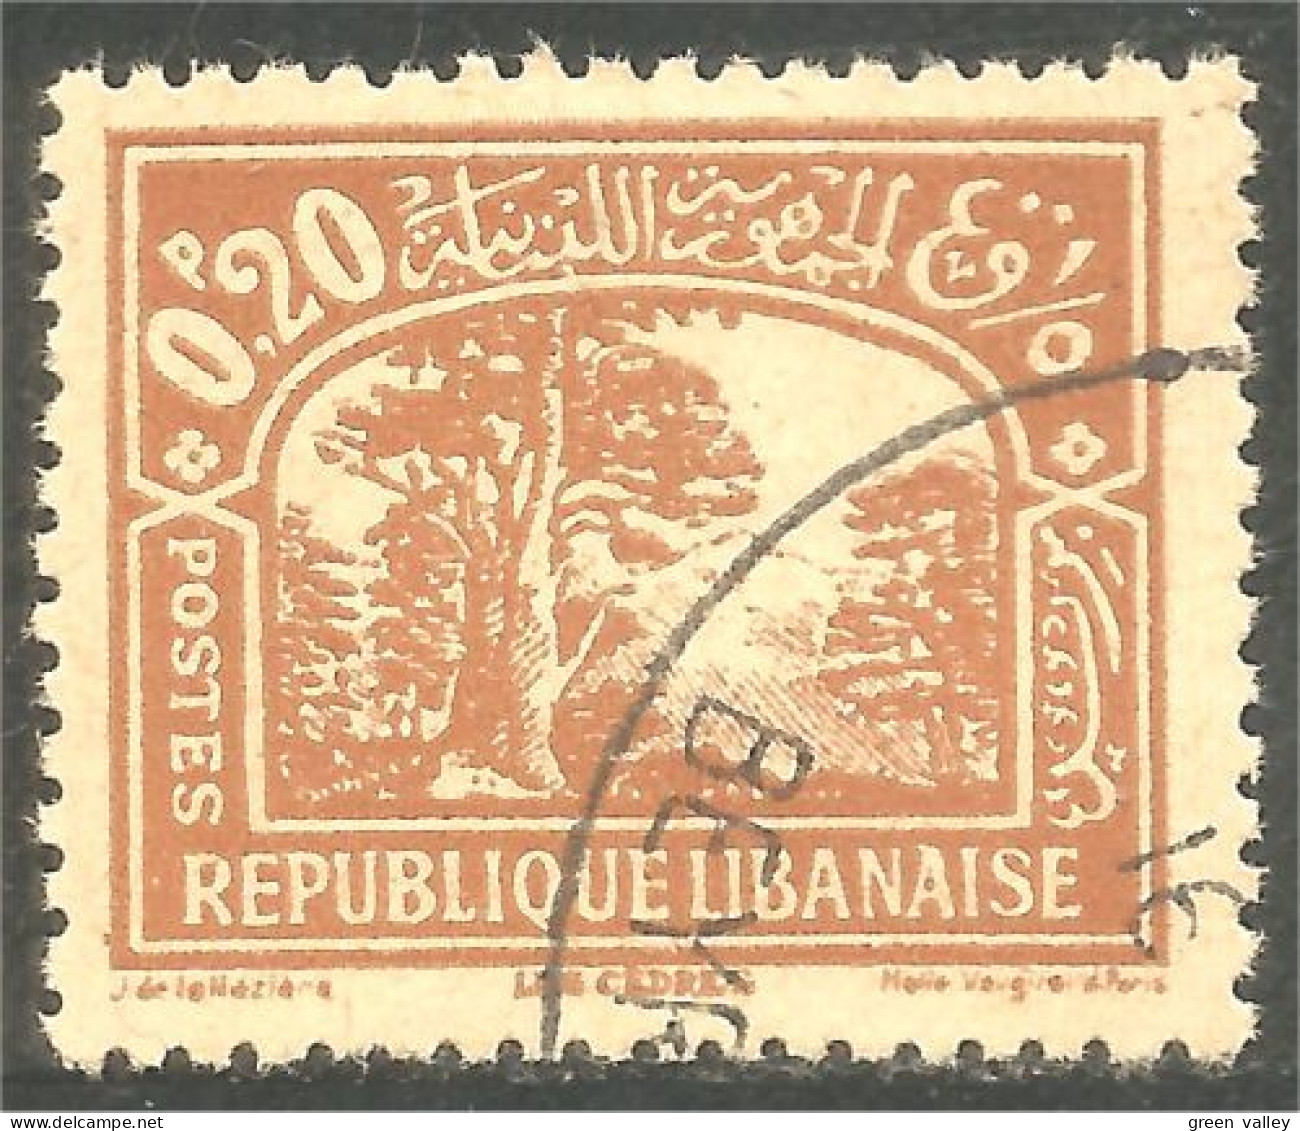 371 Grand Liban 1930 Beyrouth Grotte Pigeons Hole (f3-ALA-48) - Used Stamps